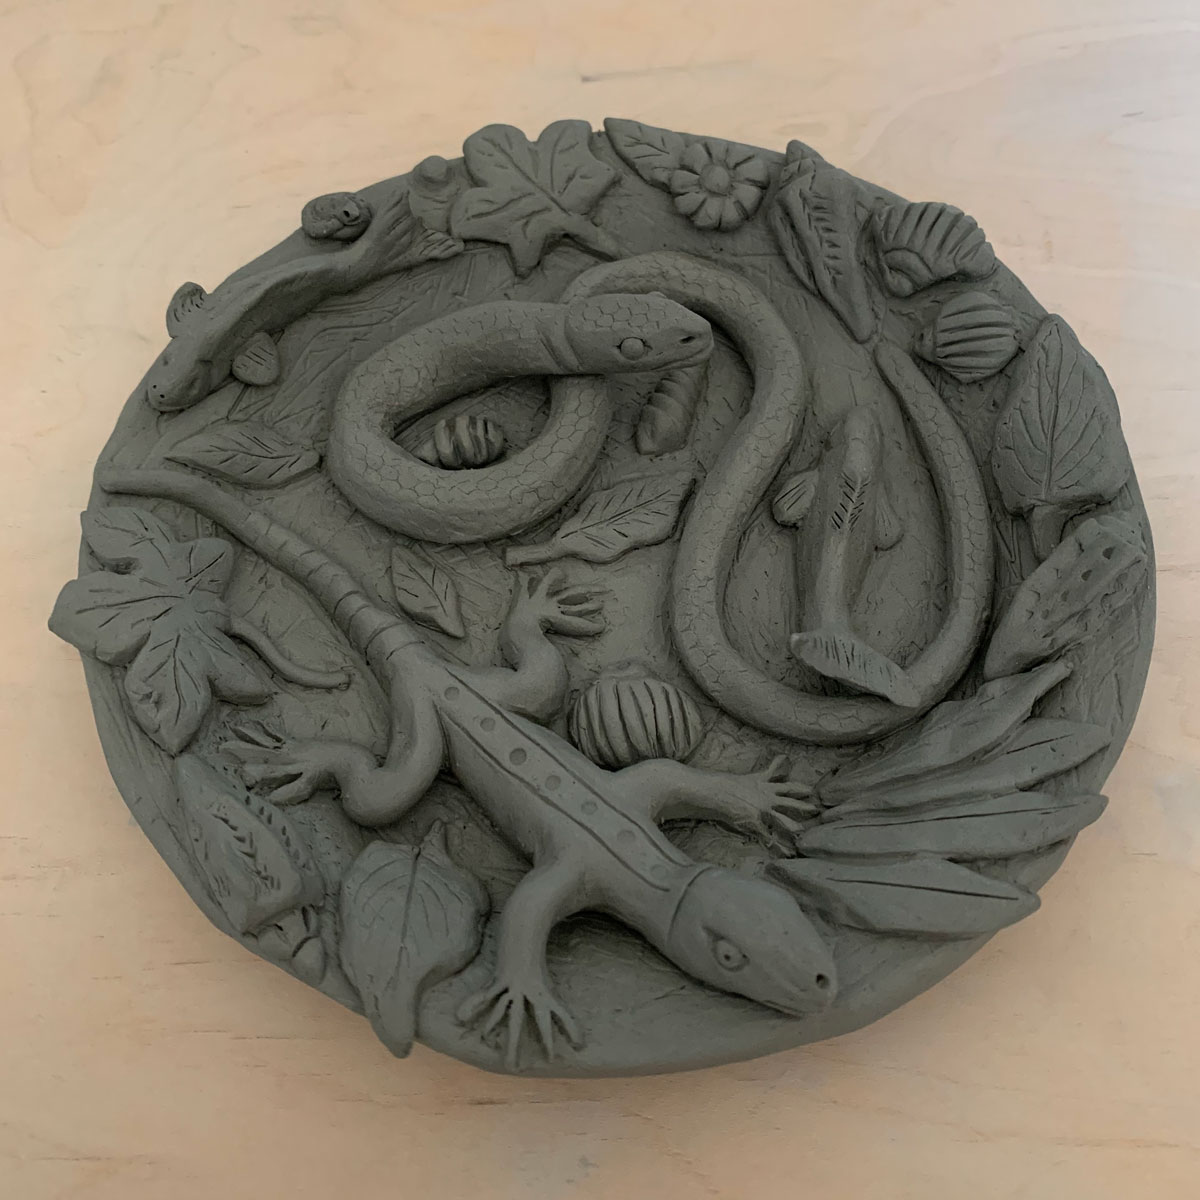 Clay plate with a snake, a lizard, leaves, and shells